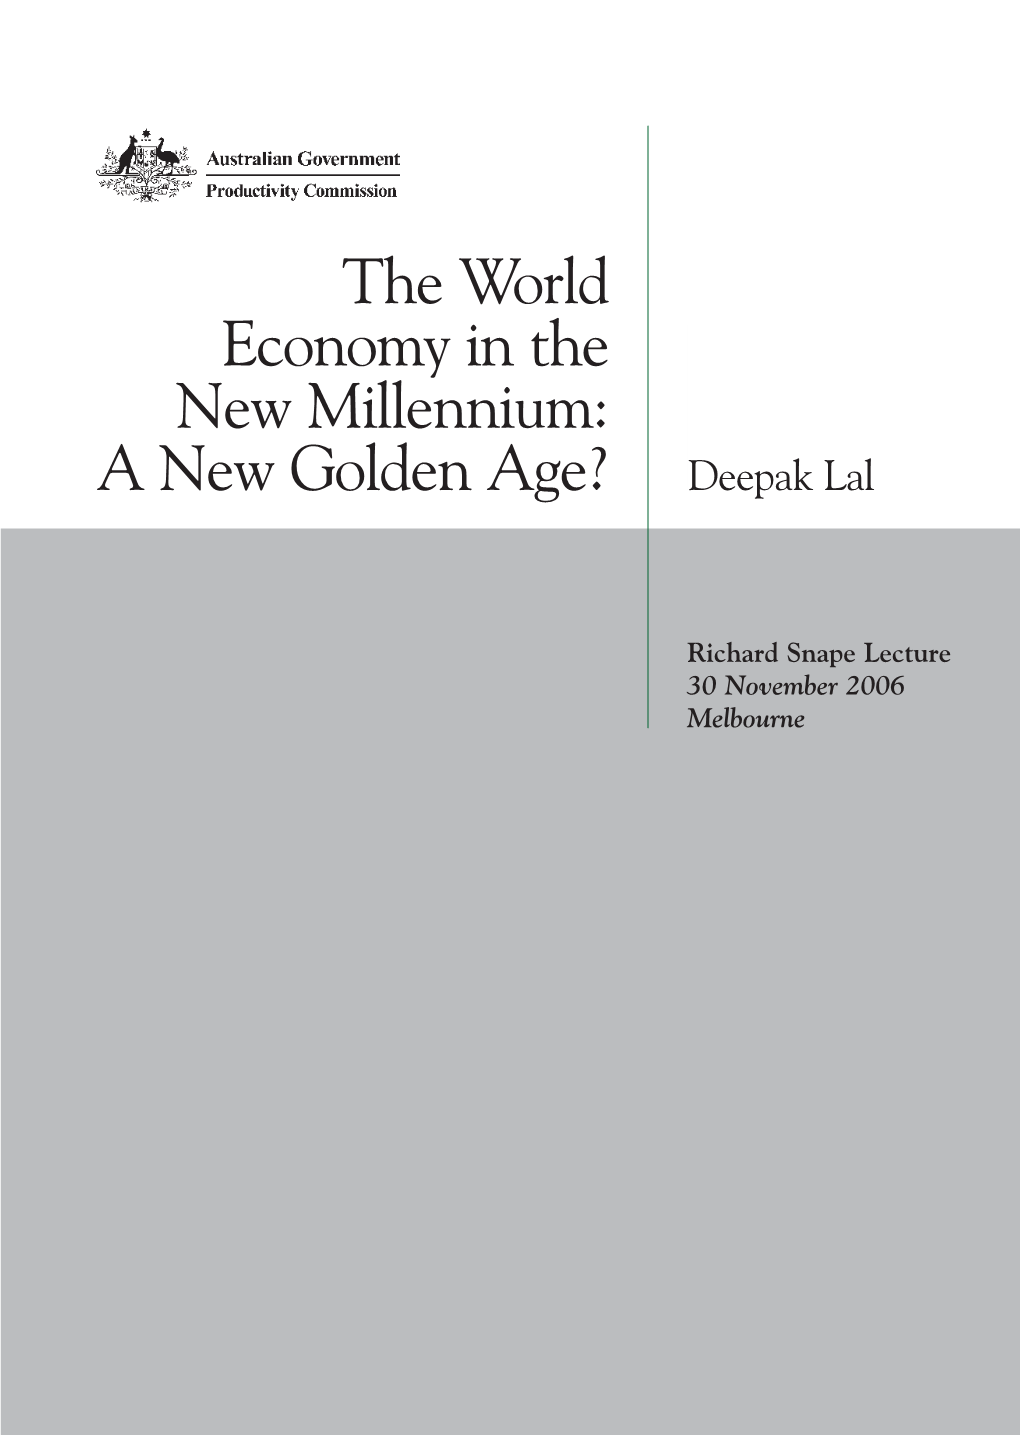 The World Economy in the New Millennium: a New Golden Age? Deepak Lal